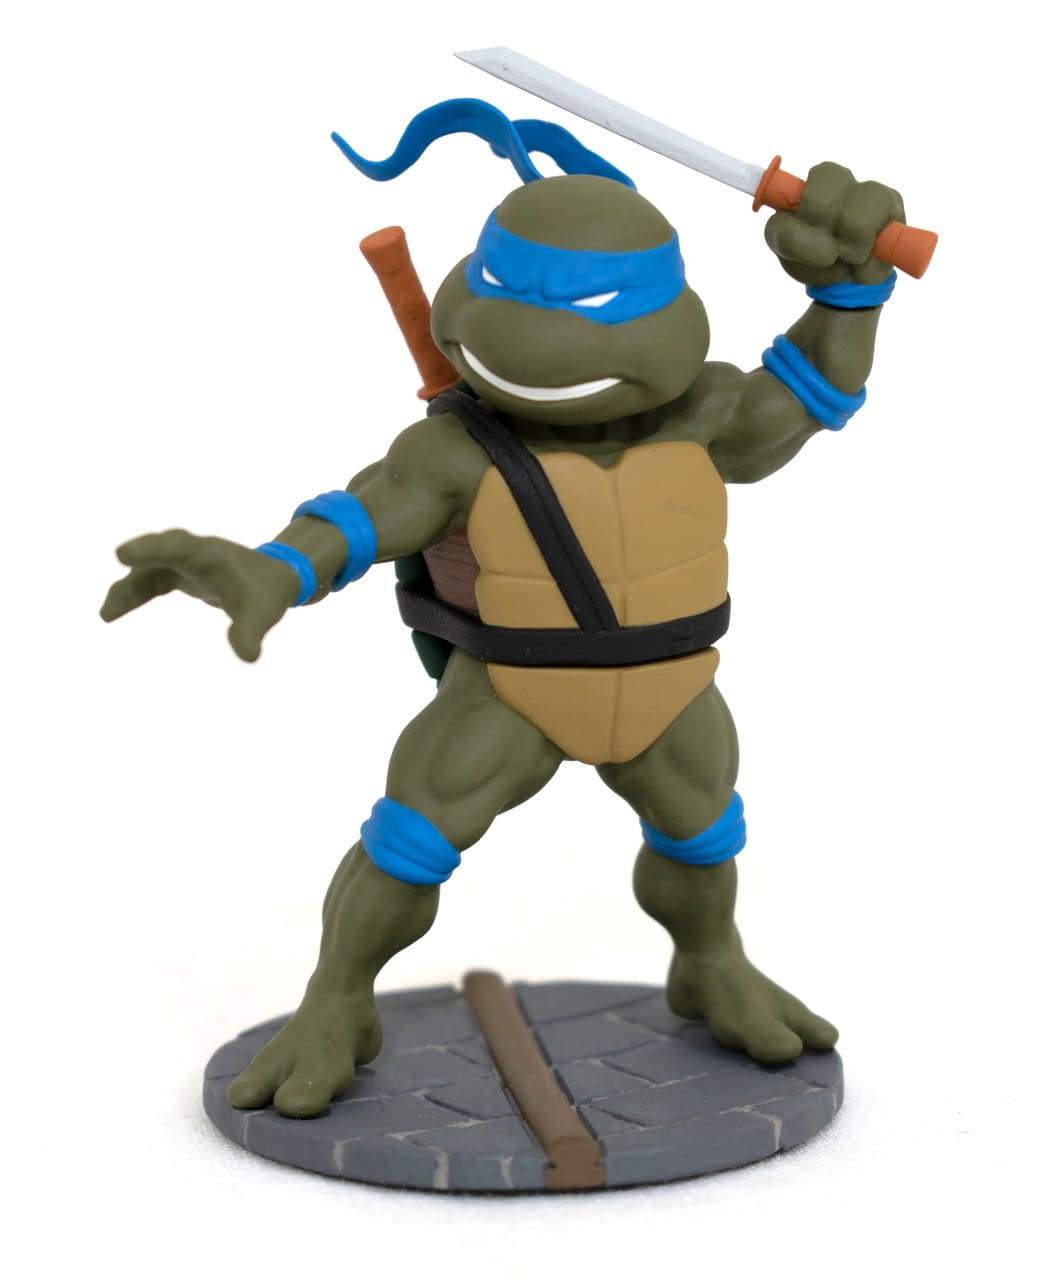 Diamond Select Debuts New SDCC Exclusives for TMNT and G.I. Joe